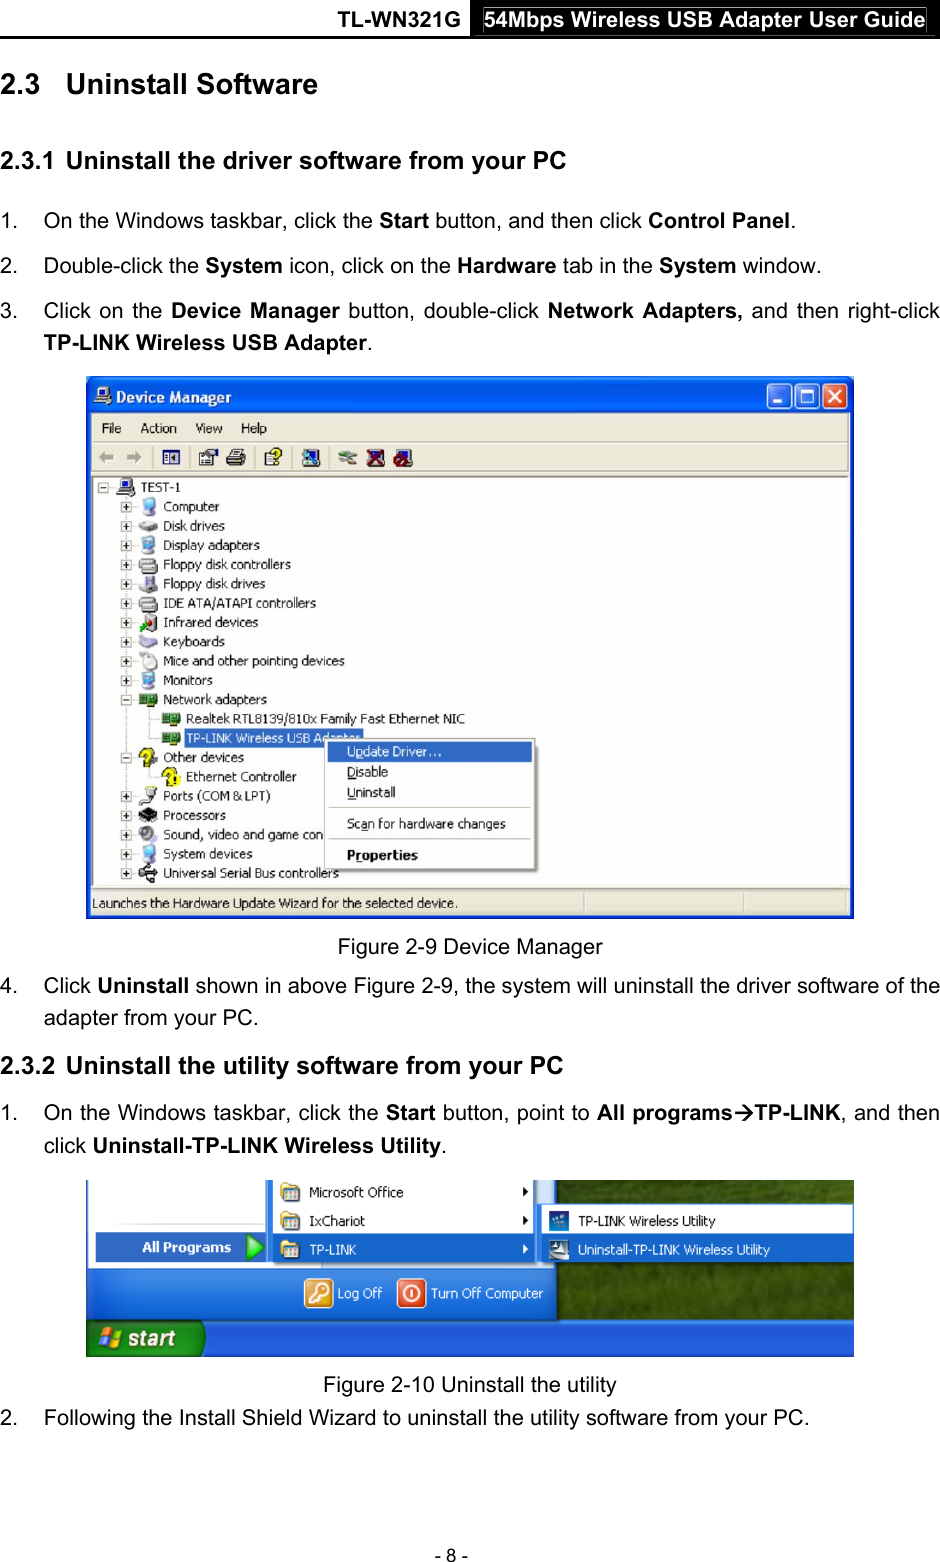 54Mbps Wireless USB Adapter User GuideTL-WN321G - 8 - 2.3  Uninstall Software 2.3.1  Uninstall the driver software from your PC 1.  On the Windows taskbar, click the Start button, and then click Control Panel. 2. Double-click the System icon, click on the Hardware tab in the System window. 3.  Click on the Device Manager button, double-click Network Adapters, and then right-click TP-LINK Wireless USB Adapter.  Figure 2-9 Device Manager 4. Click Uninstall shown in above Figure 2-9, the system will uninstall the driver software of the adapter from your PC. 2.3.2  Uninstall the utility software from your PC   1.  On the Windows taskbar, click the Start button, point to All programsÆTP-LINK, and then click Uninstall-TP-LINK Wireless Utility.  Figure 2-10 Uninstall the utility 2.  Following the Install Shield Wizard to uninstall the utility software from your PC. 